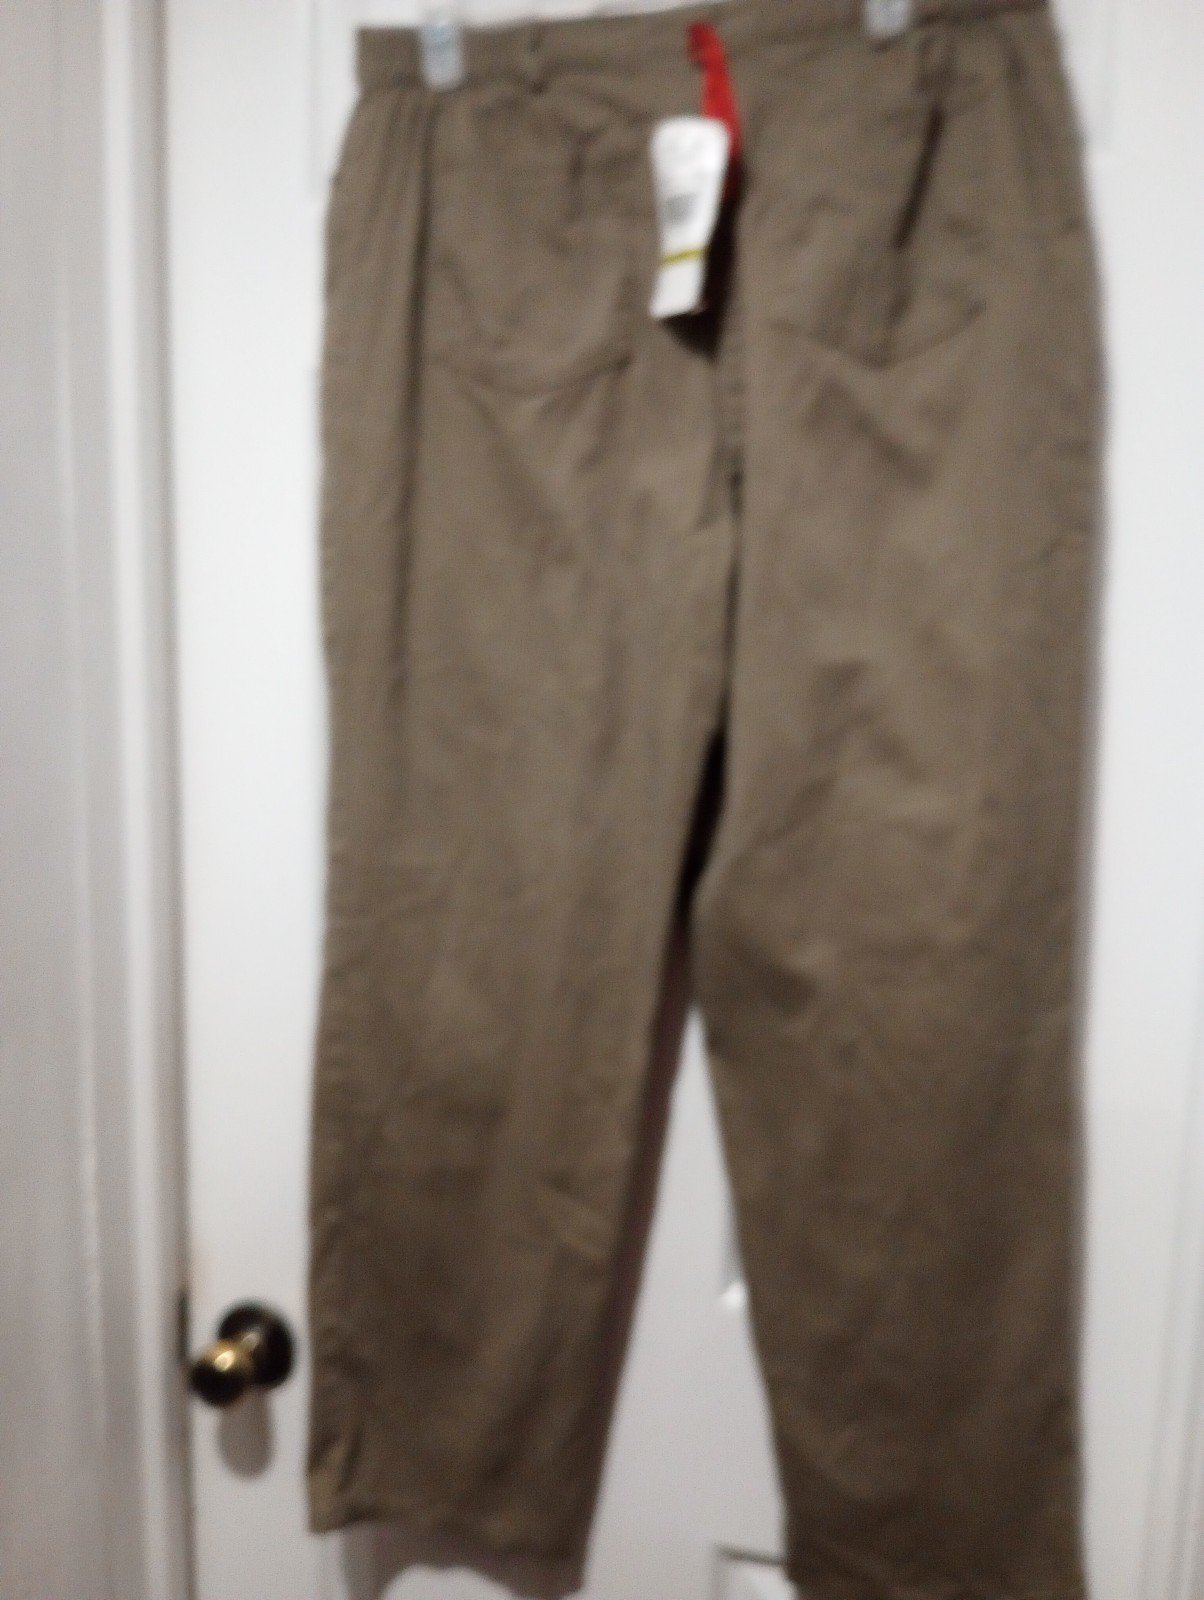 Perfect New Women´s Ruby Rd. Pants size 14 Olive green lnSfshebt Outlet Store